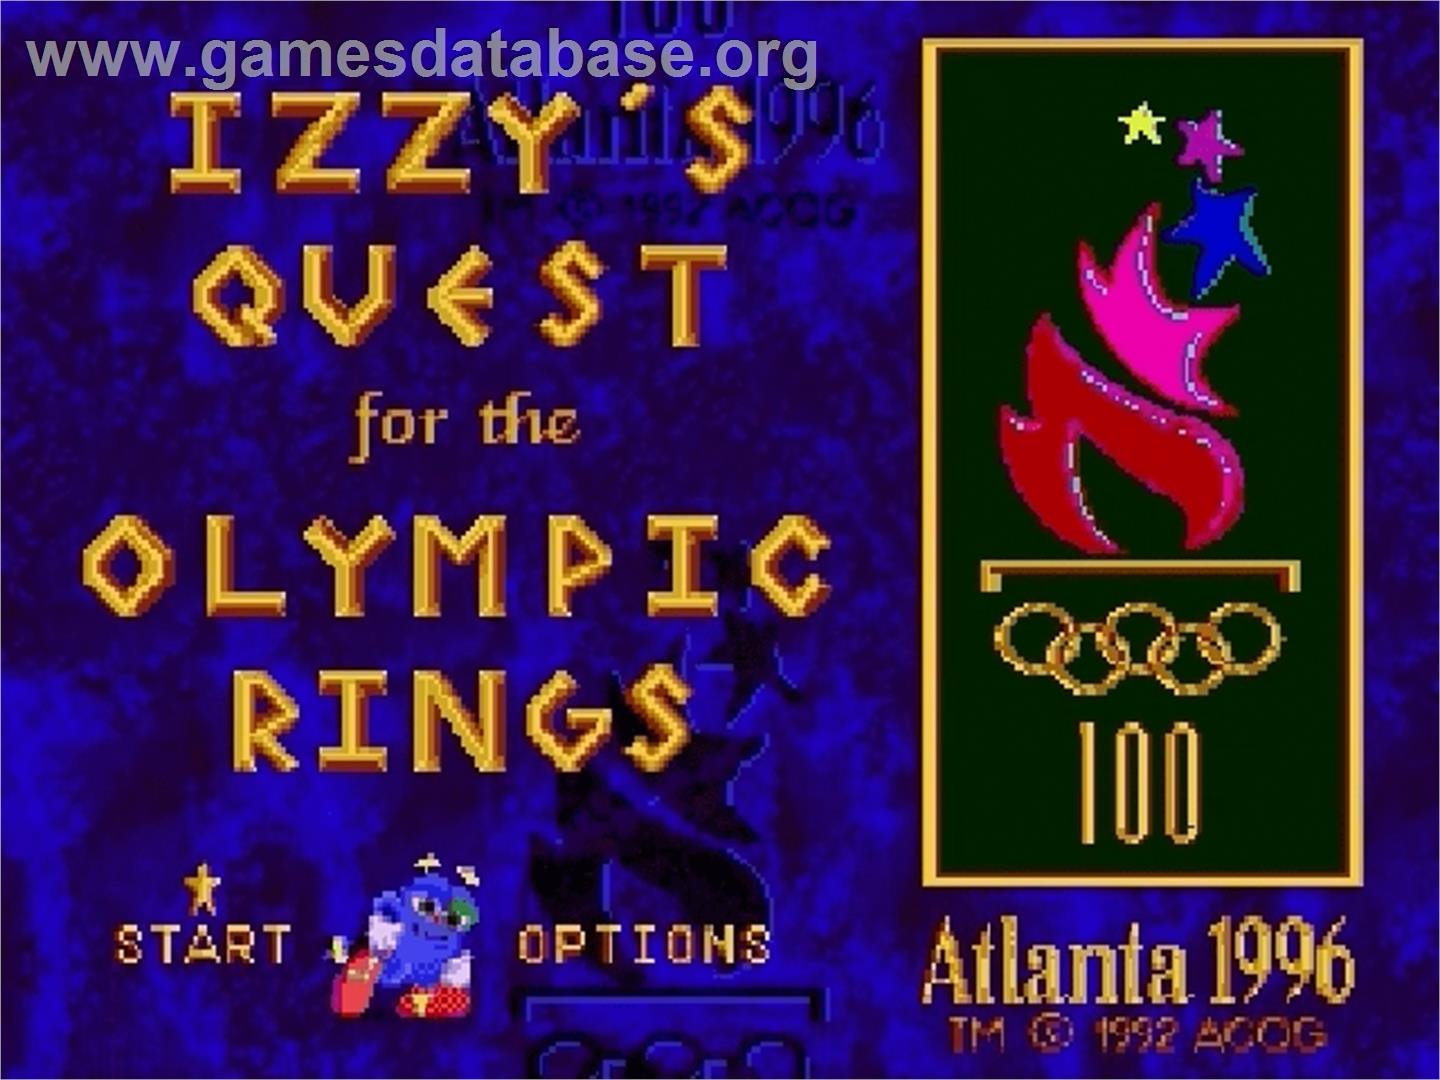 Izzy's Quest for the Olympic Rings - Sega Genesis - Artwork - Title Screen